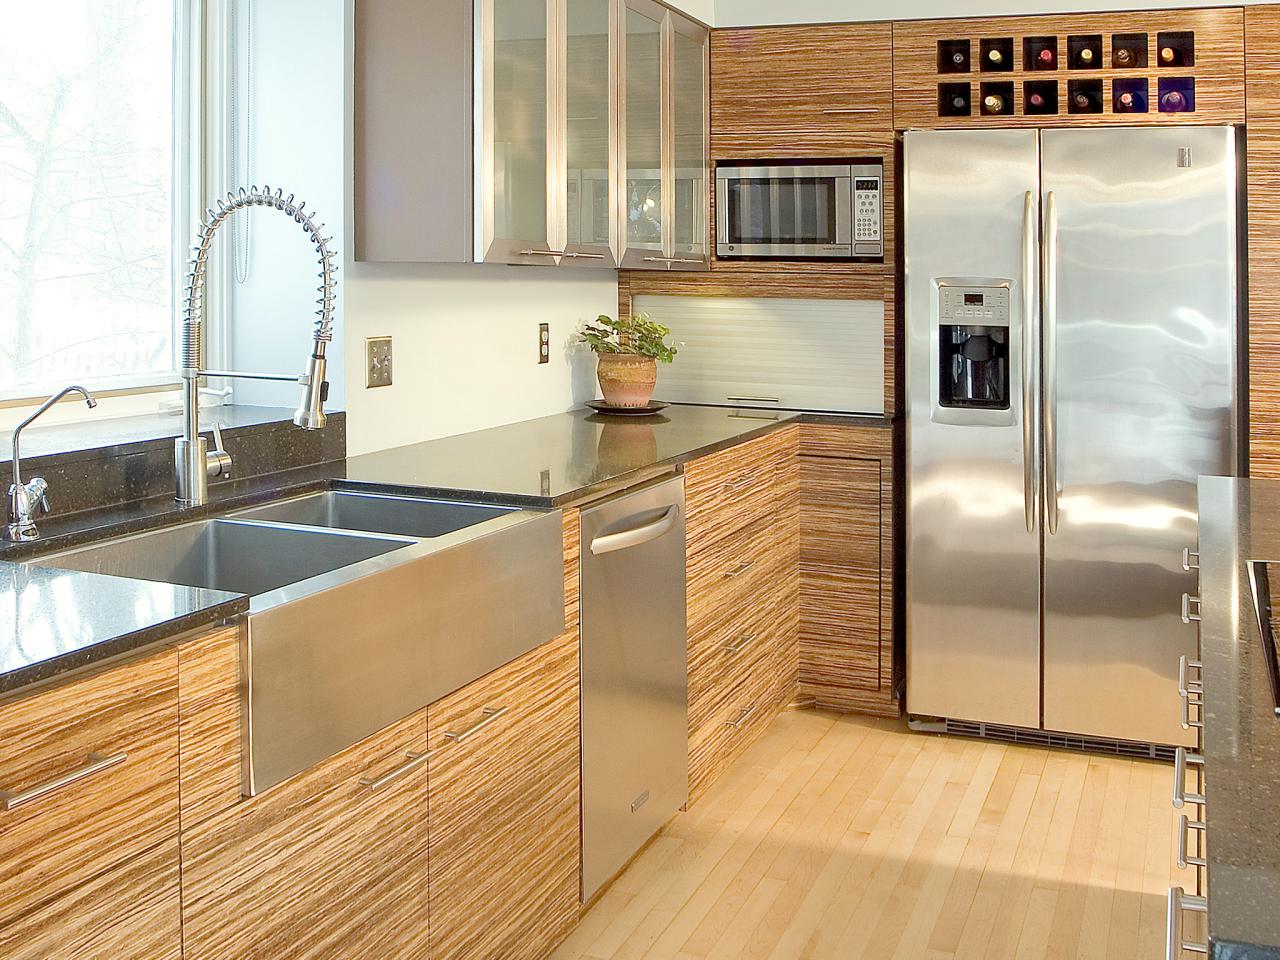 home design architecture: used kitchen cabinet doors for sale